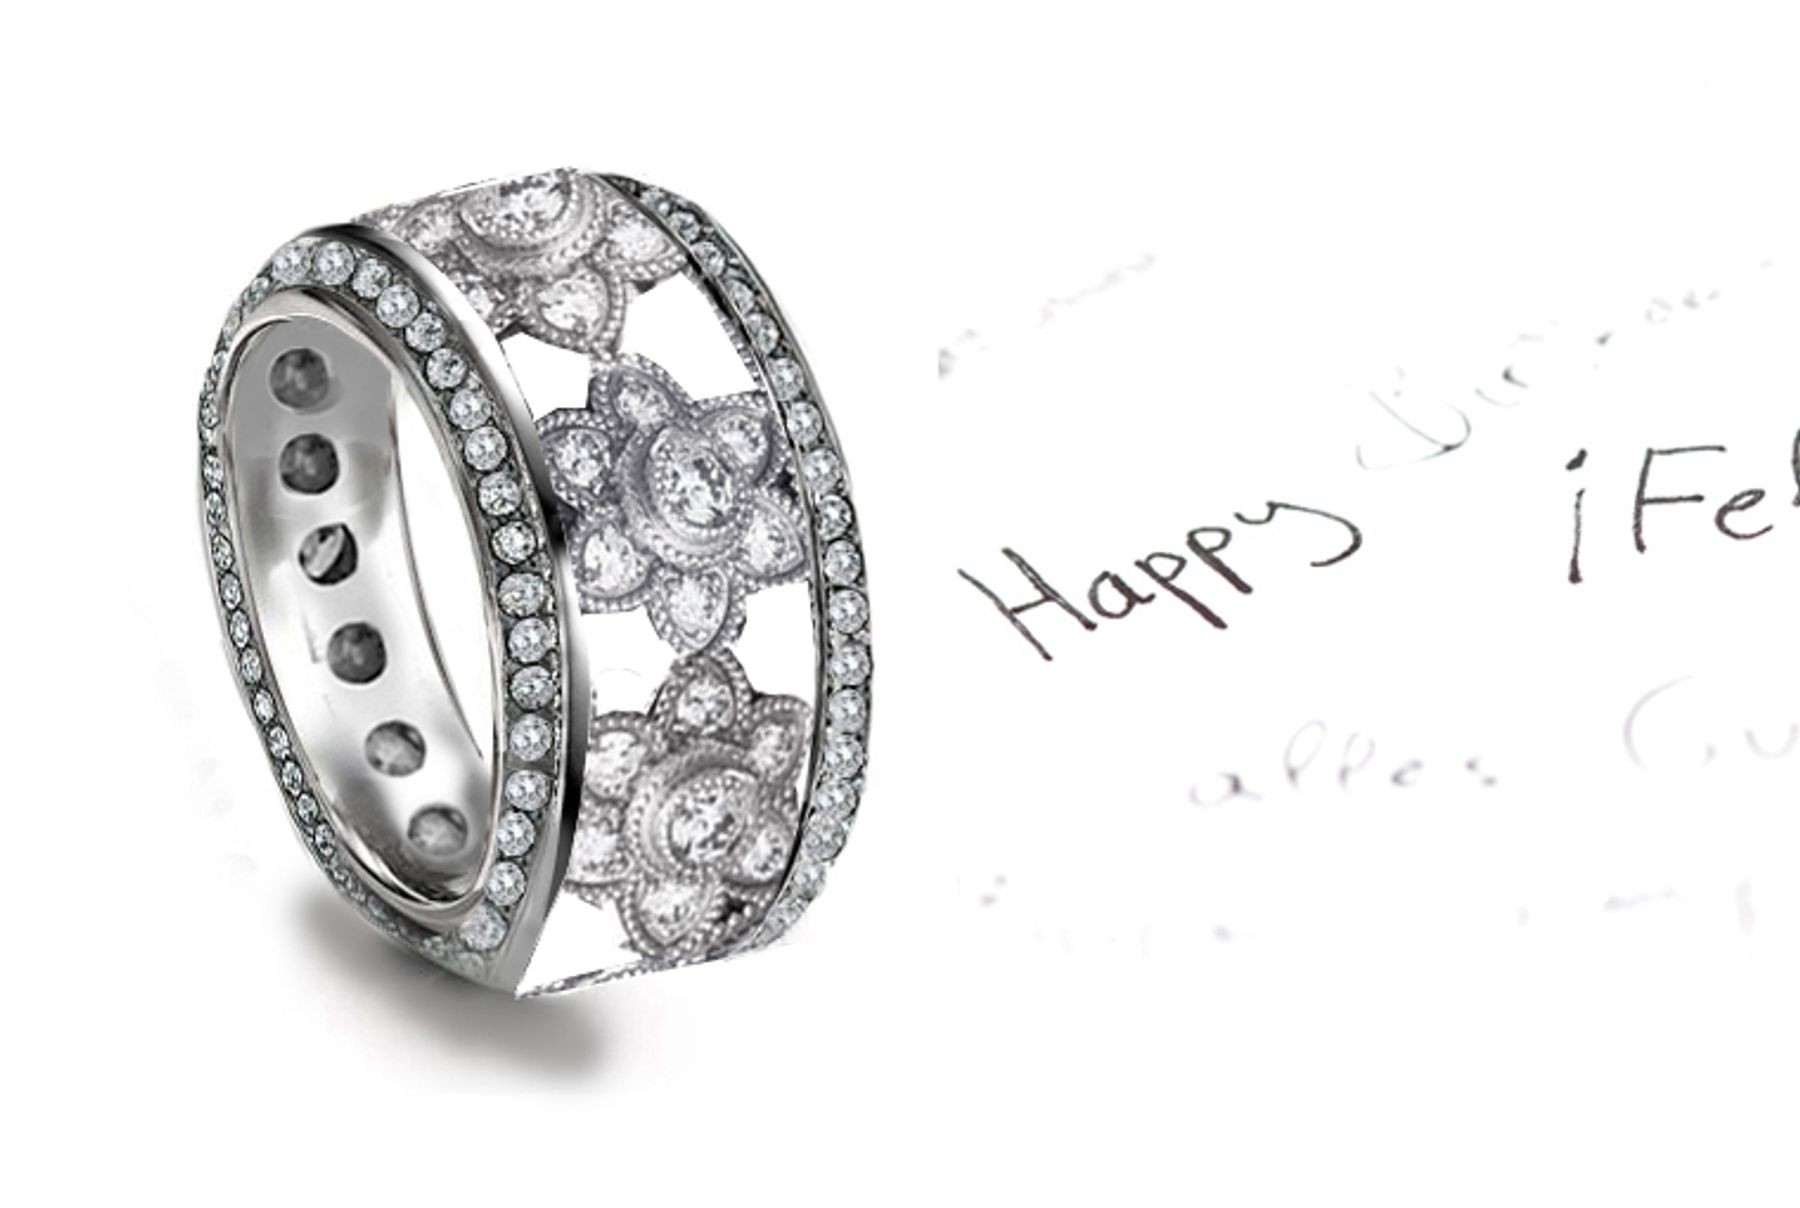 "Wide Breadth" Soaring Diamond Open Work Platinum Band Diamonds Micropavee in Floral Motifs All Around